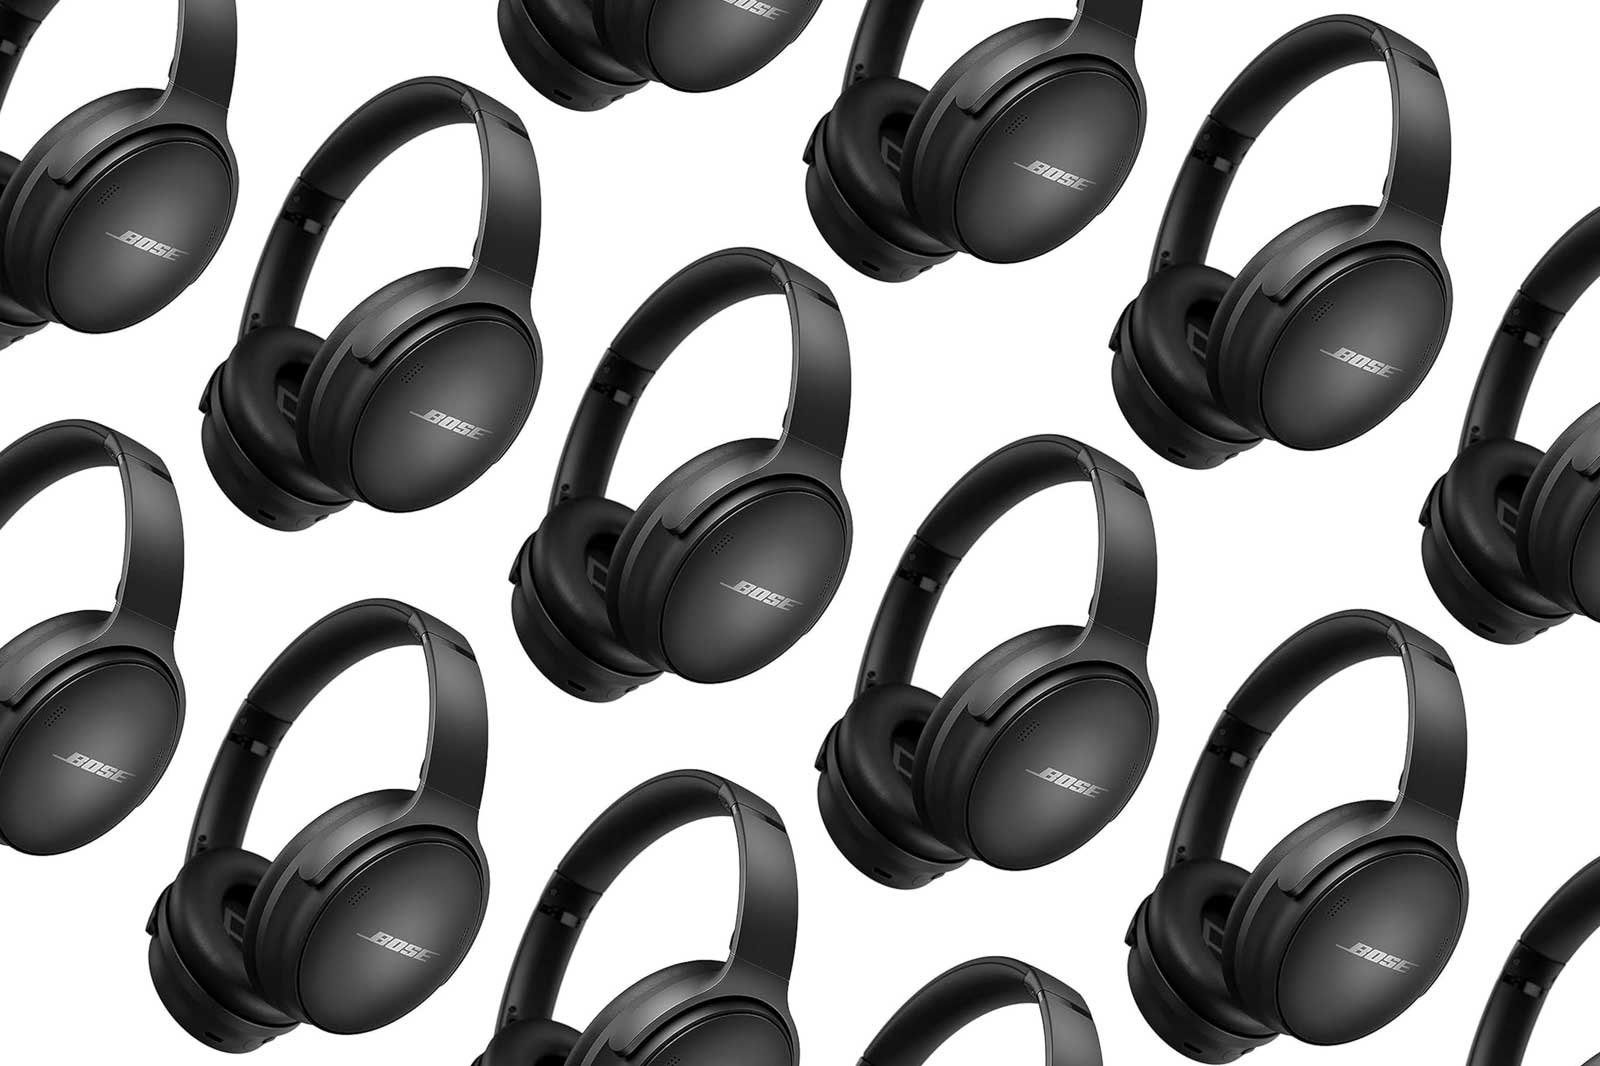 These Black Friday Bose Headphone Deals Sound Amazing, With Up to 40% Off -  CNET